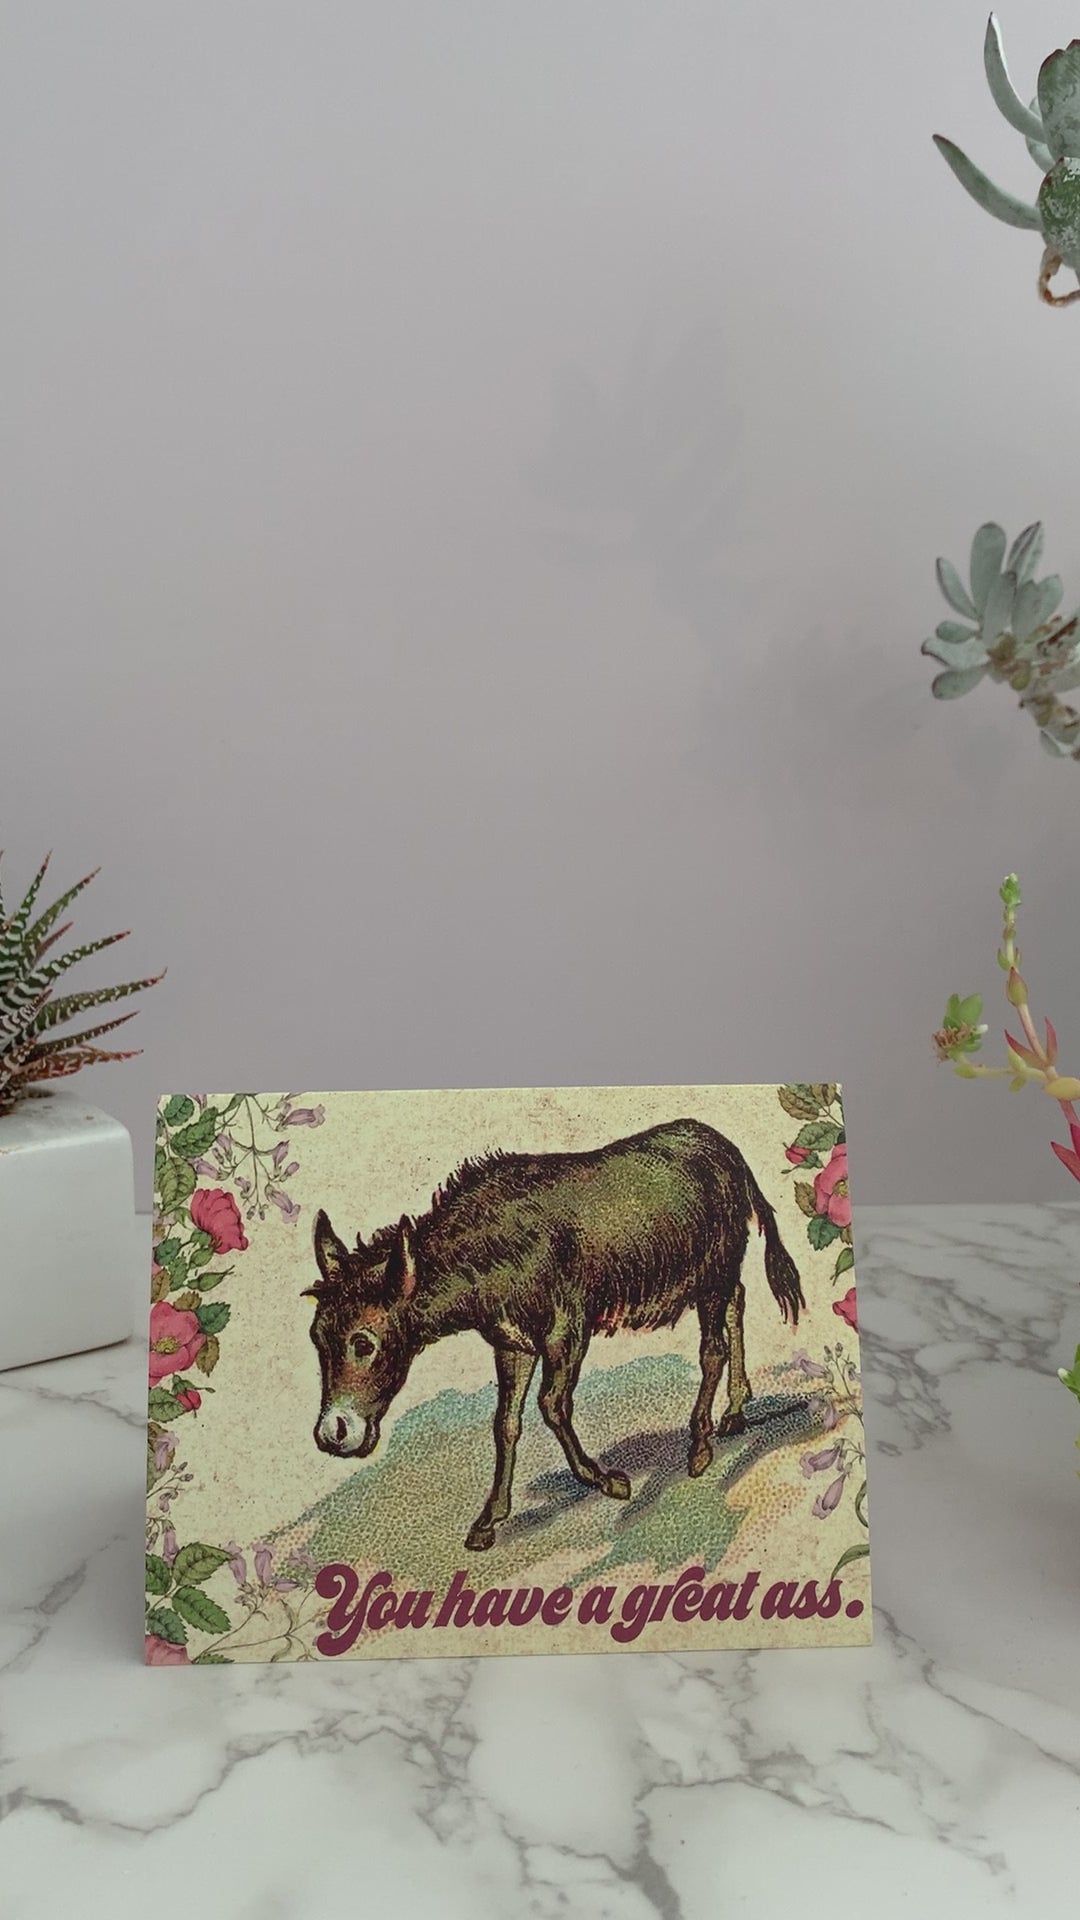 Greeting card perfect to send to your crush, your husband, your wife, your best friend, Valentine's day, or any occasion. Featuring an image of a brown vintage donkey surrounded by flowers. Color pallet is yellows, pinks, greens and blues. Greeting says, "You have a great ass." on the front. Blank inside.